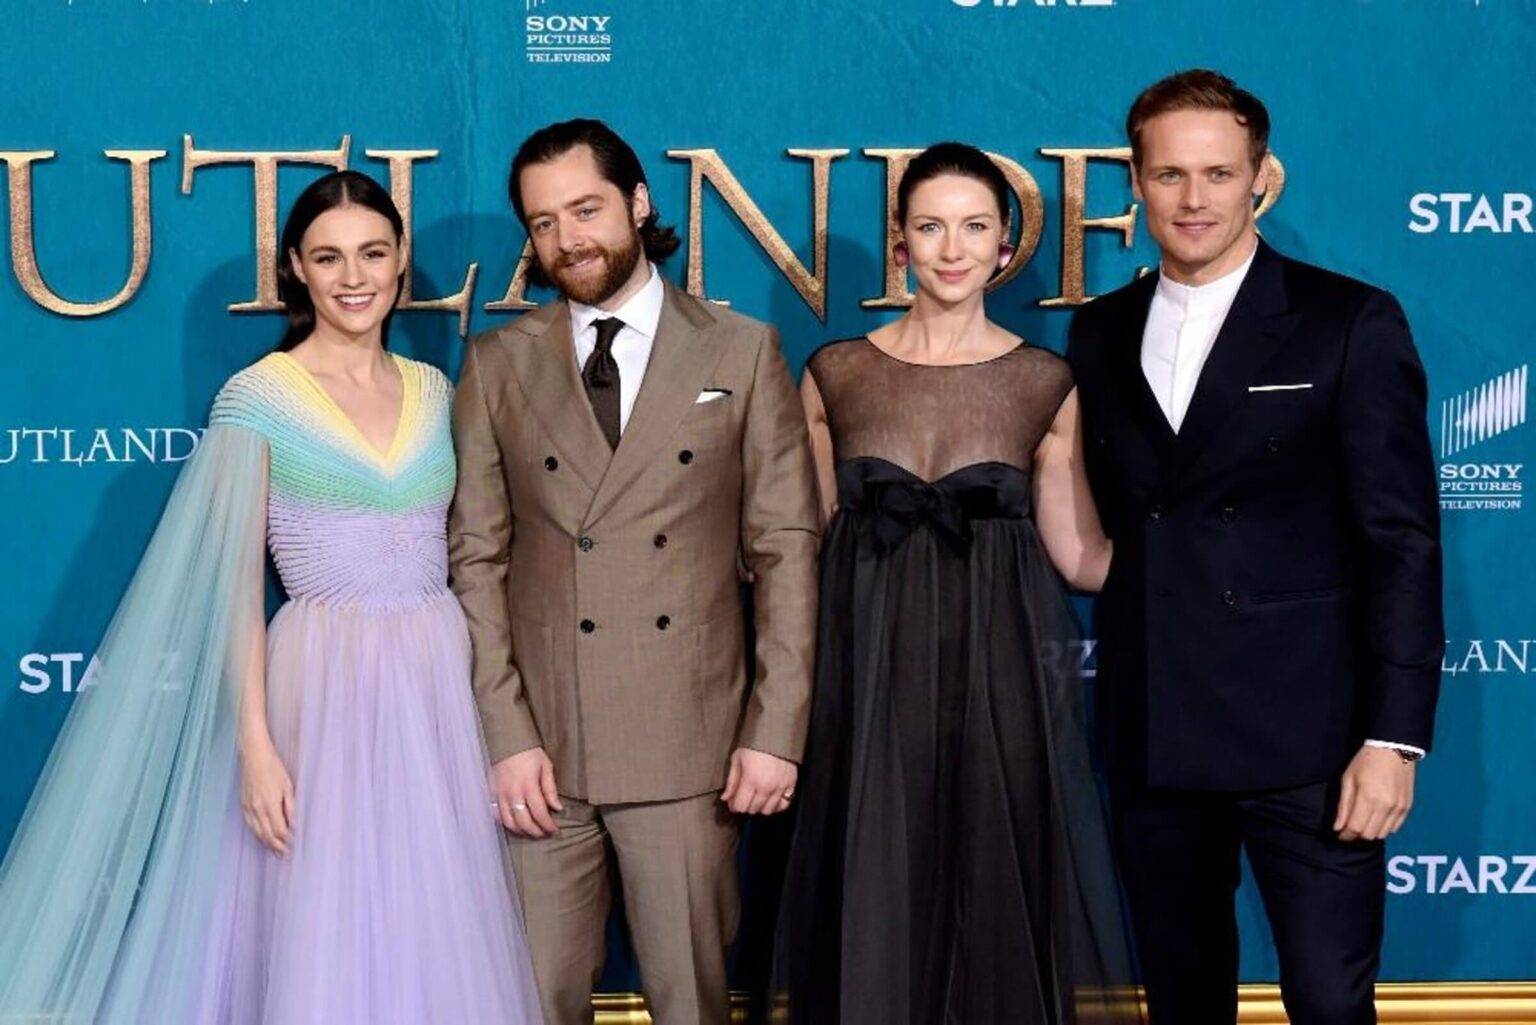 How long will intermission last? How many seasons of 'Outlander' will there be? Will the show be cancelled? Learn the very latest information now!